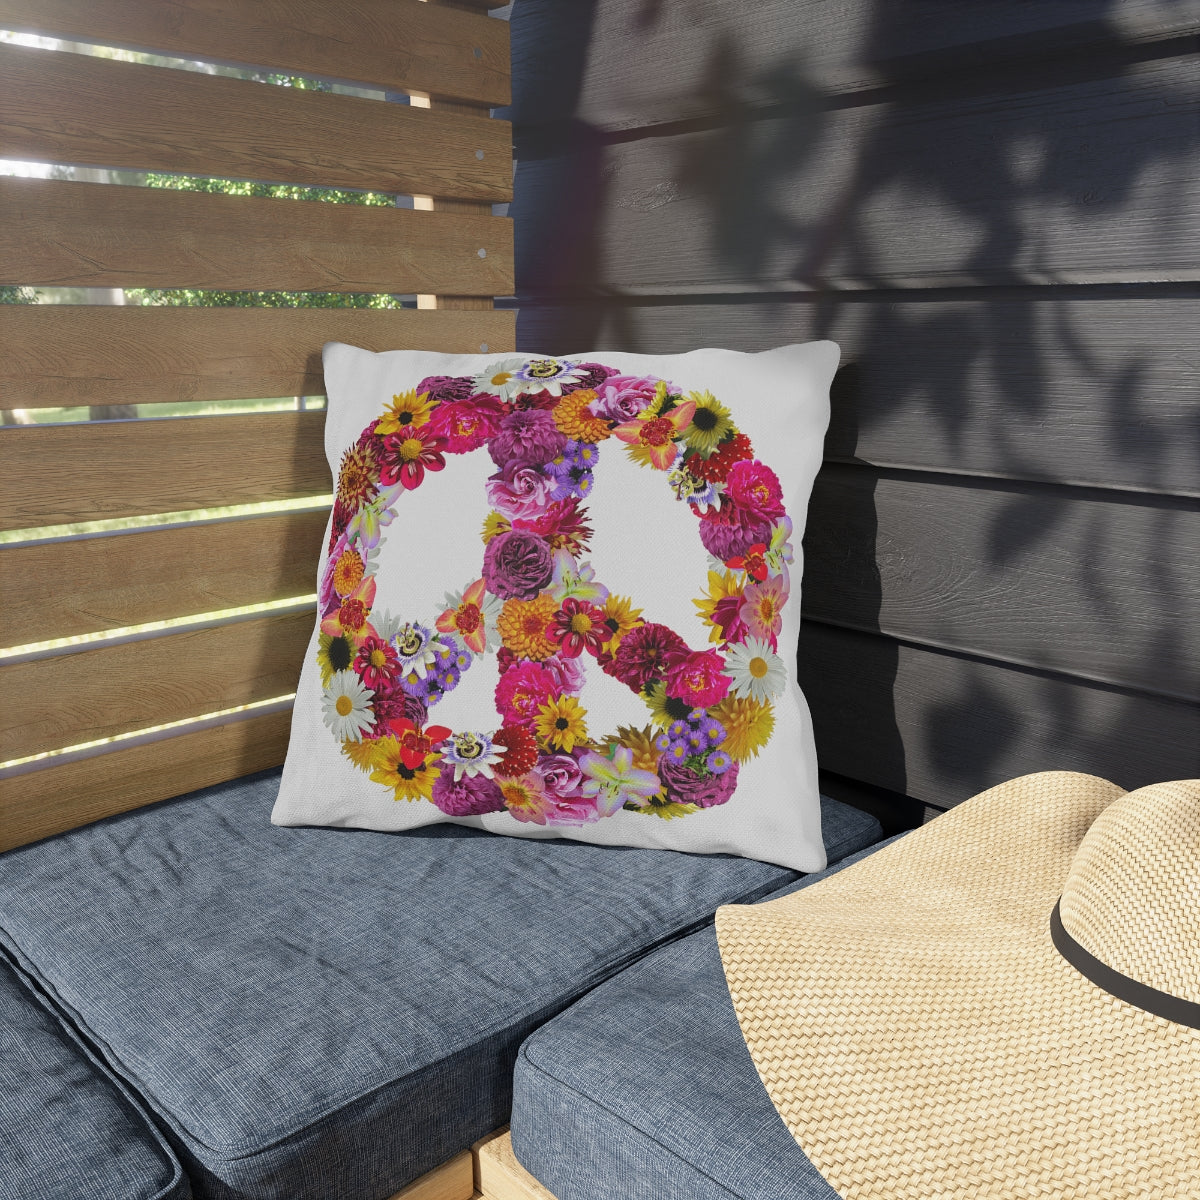 Peace-Full Flowers Outdoor Pillows